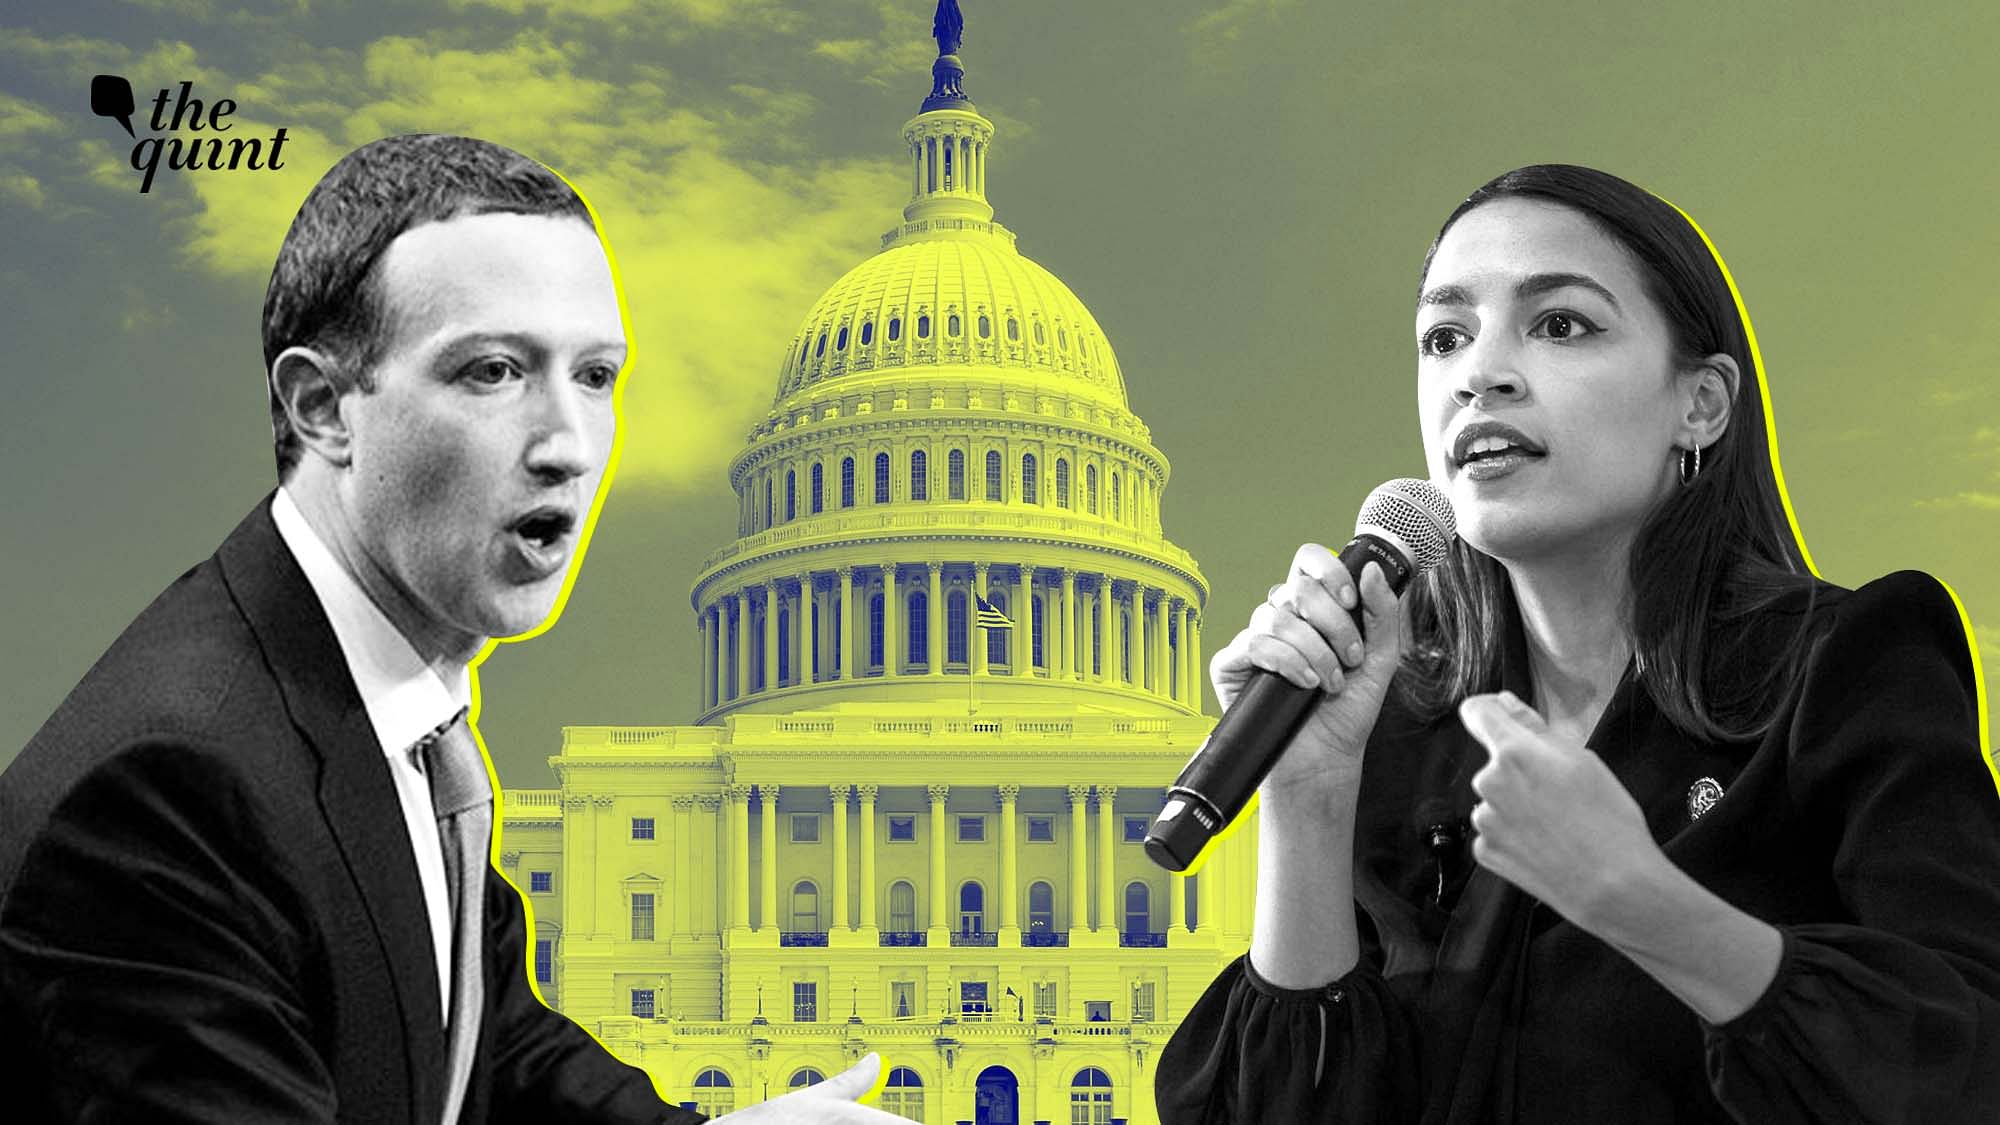 Representative Alexandria Ocasia Cortez (AOC) led a tough line of questioning on Cambridge Analytica, political disinformation and abetting white supremacy.&nbsp;